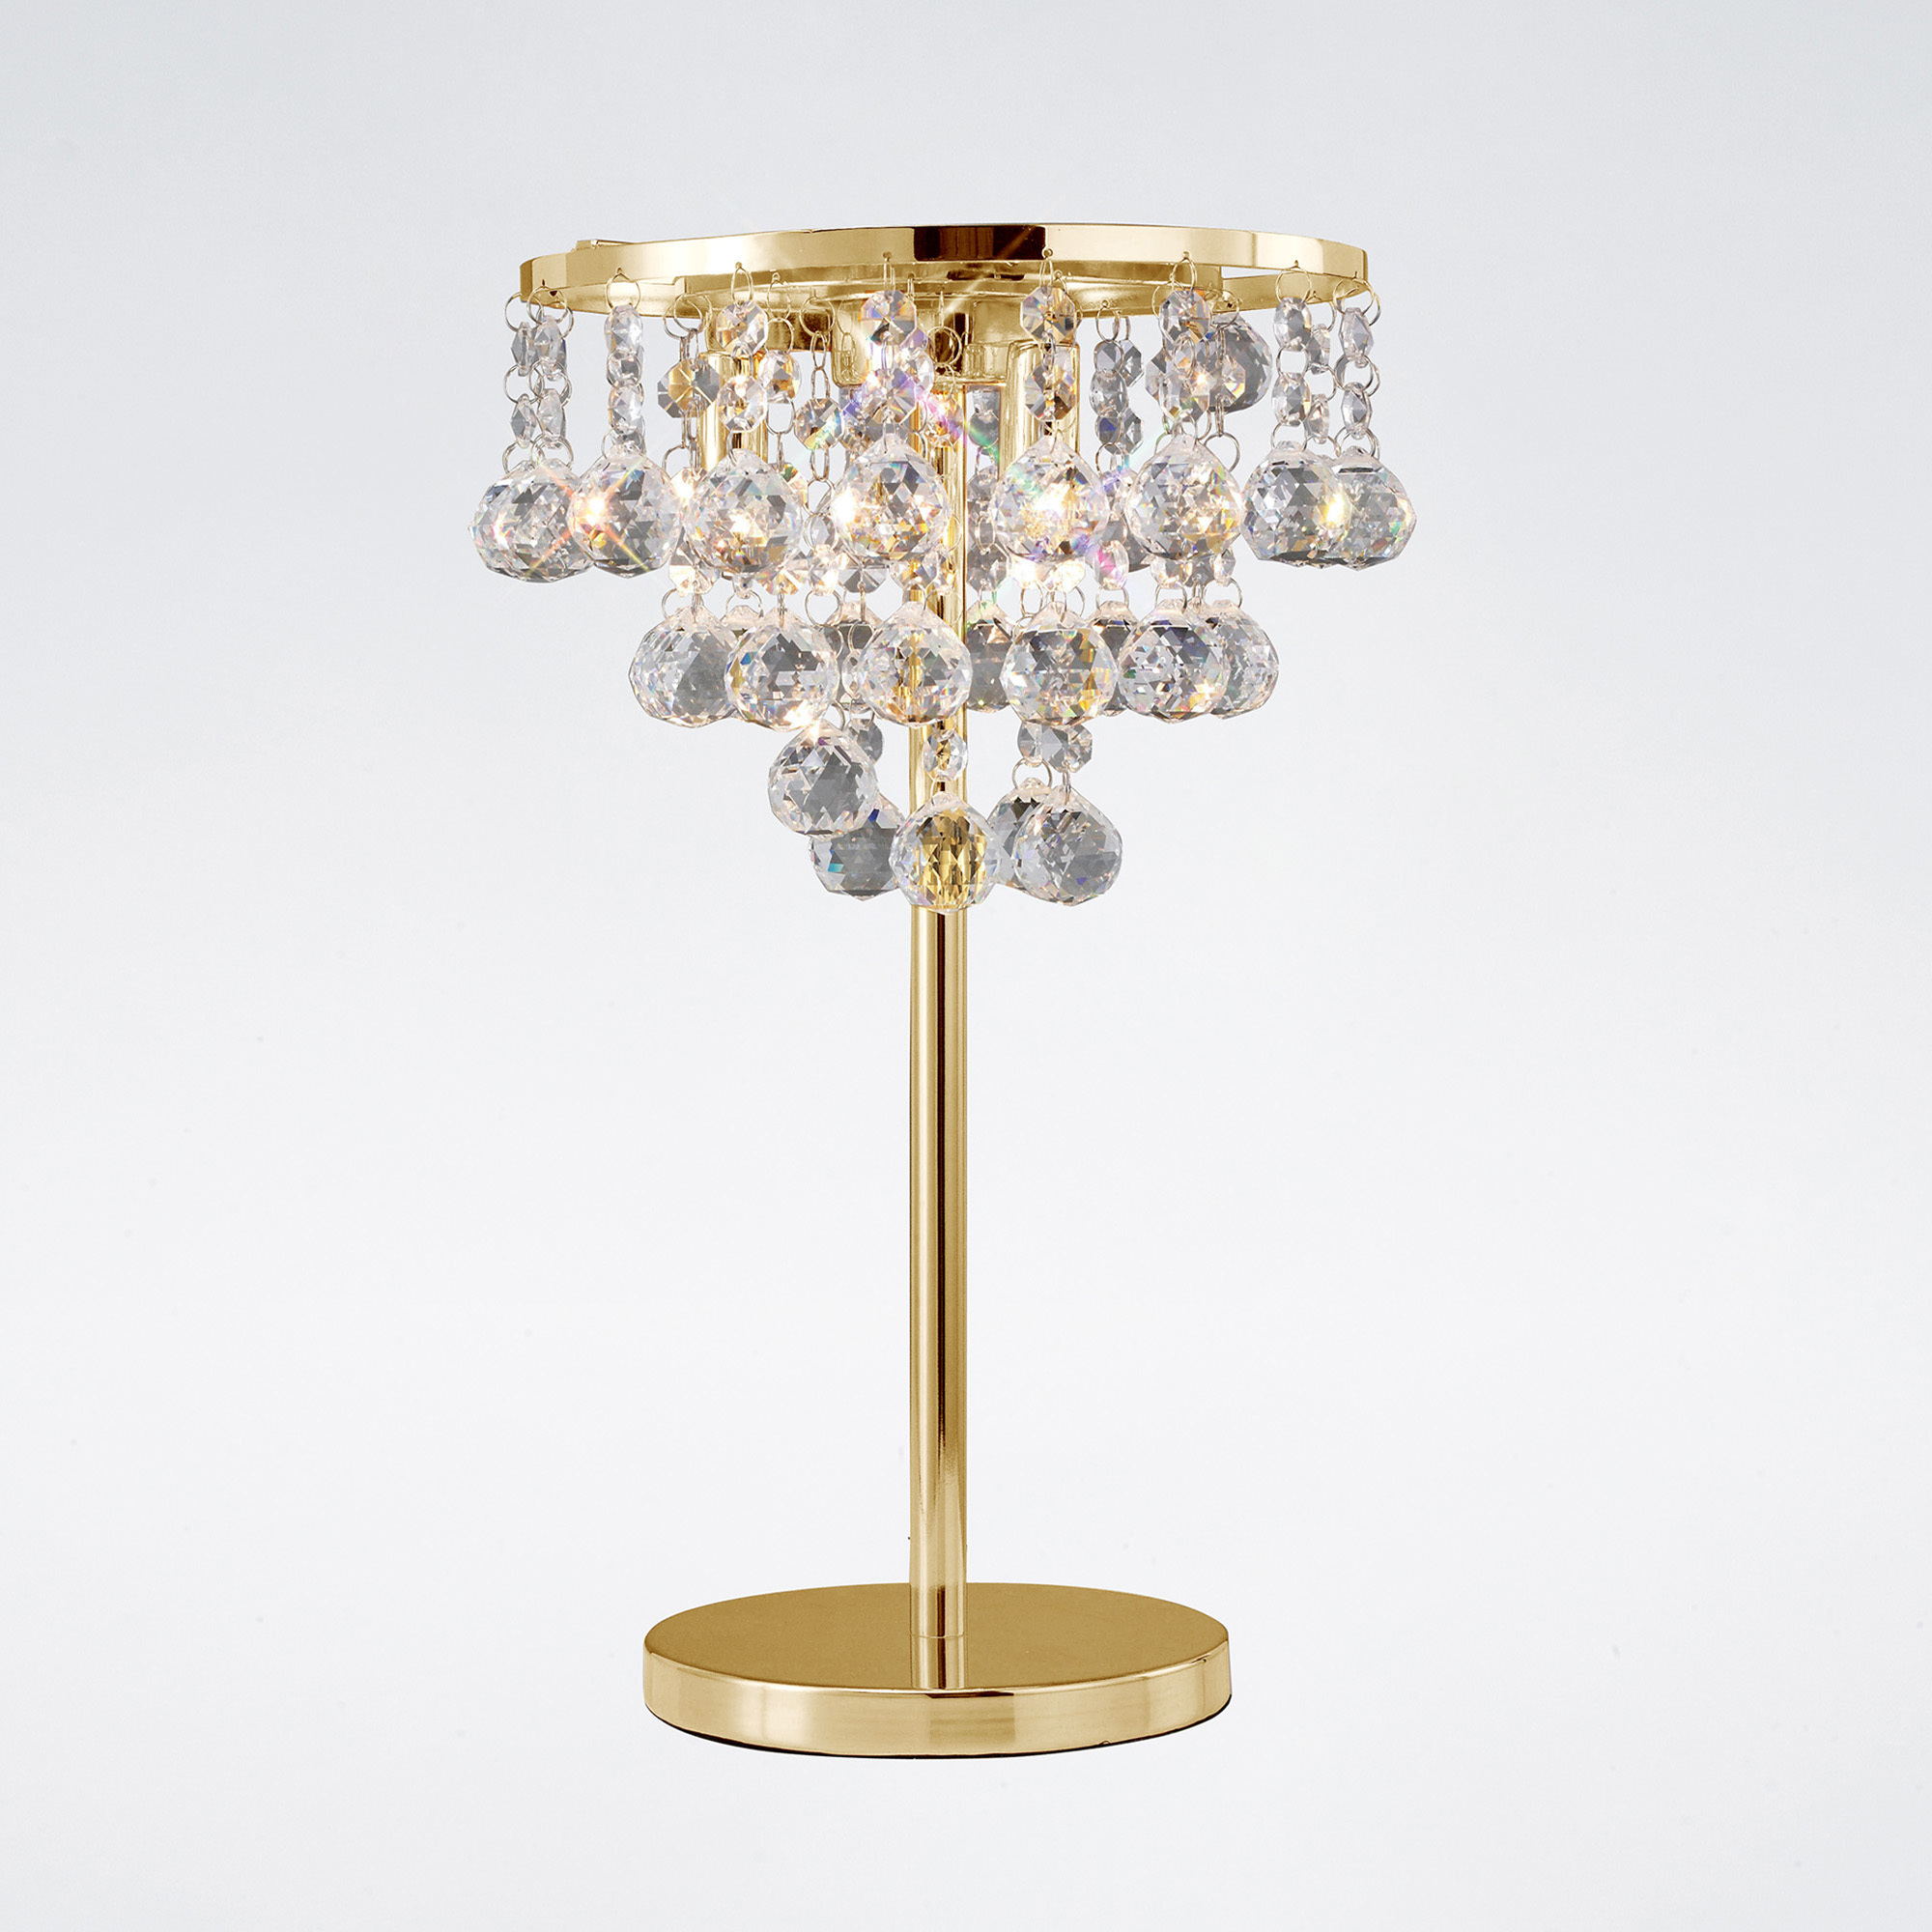 Atla French Gold Crystal Table Lamps Diyas Designer Table Lamps